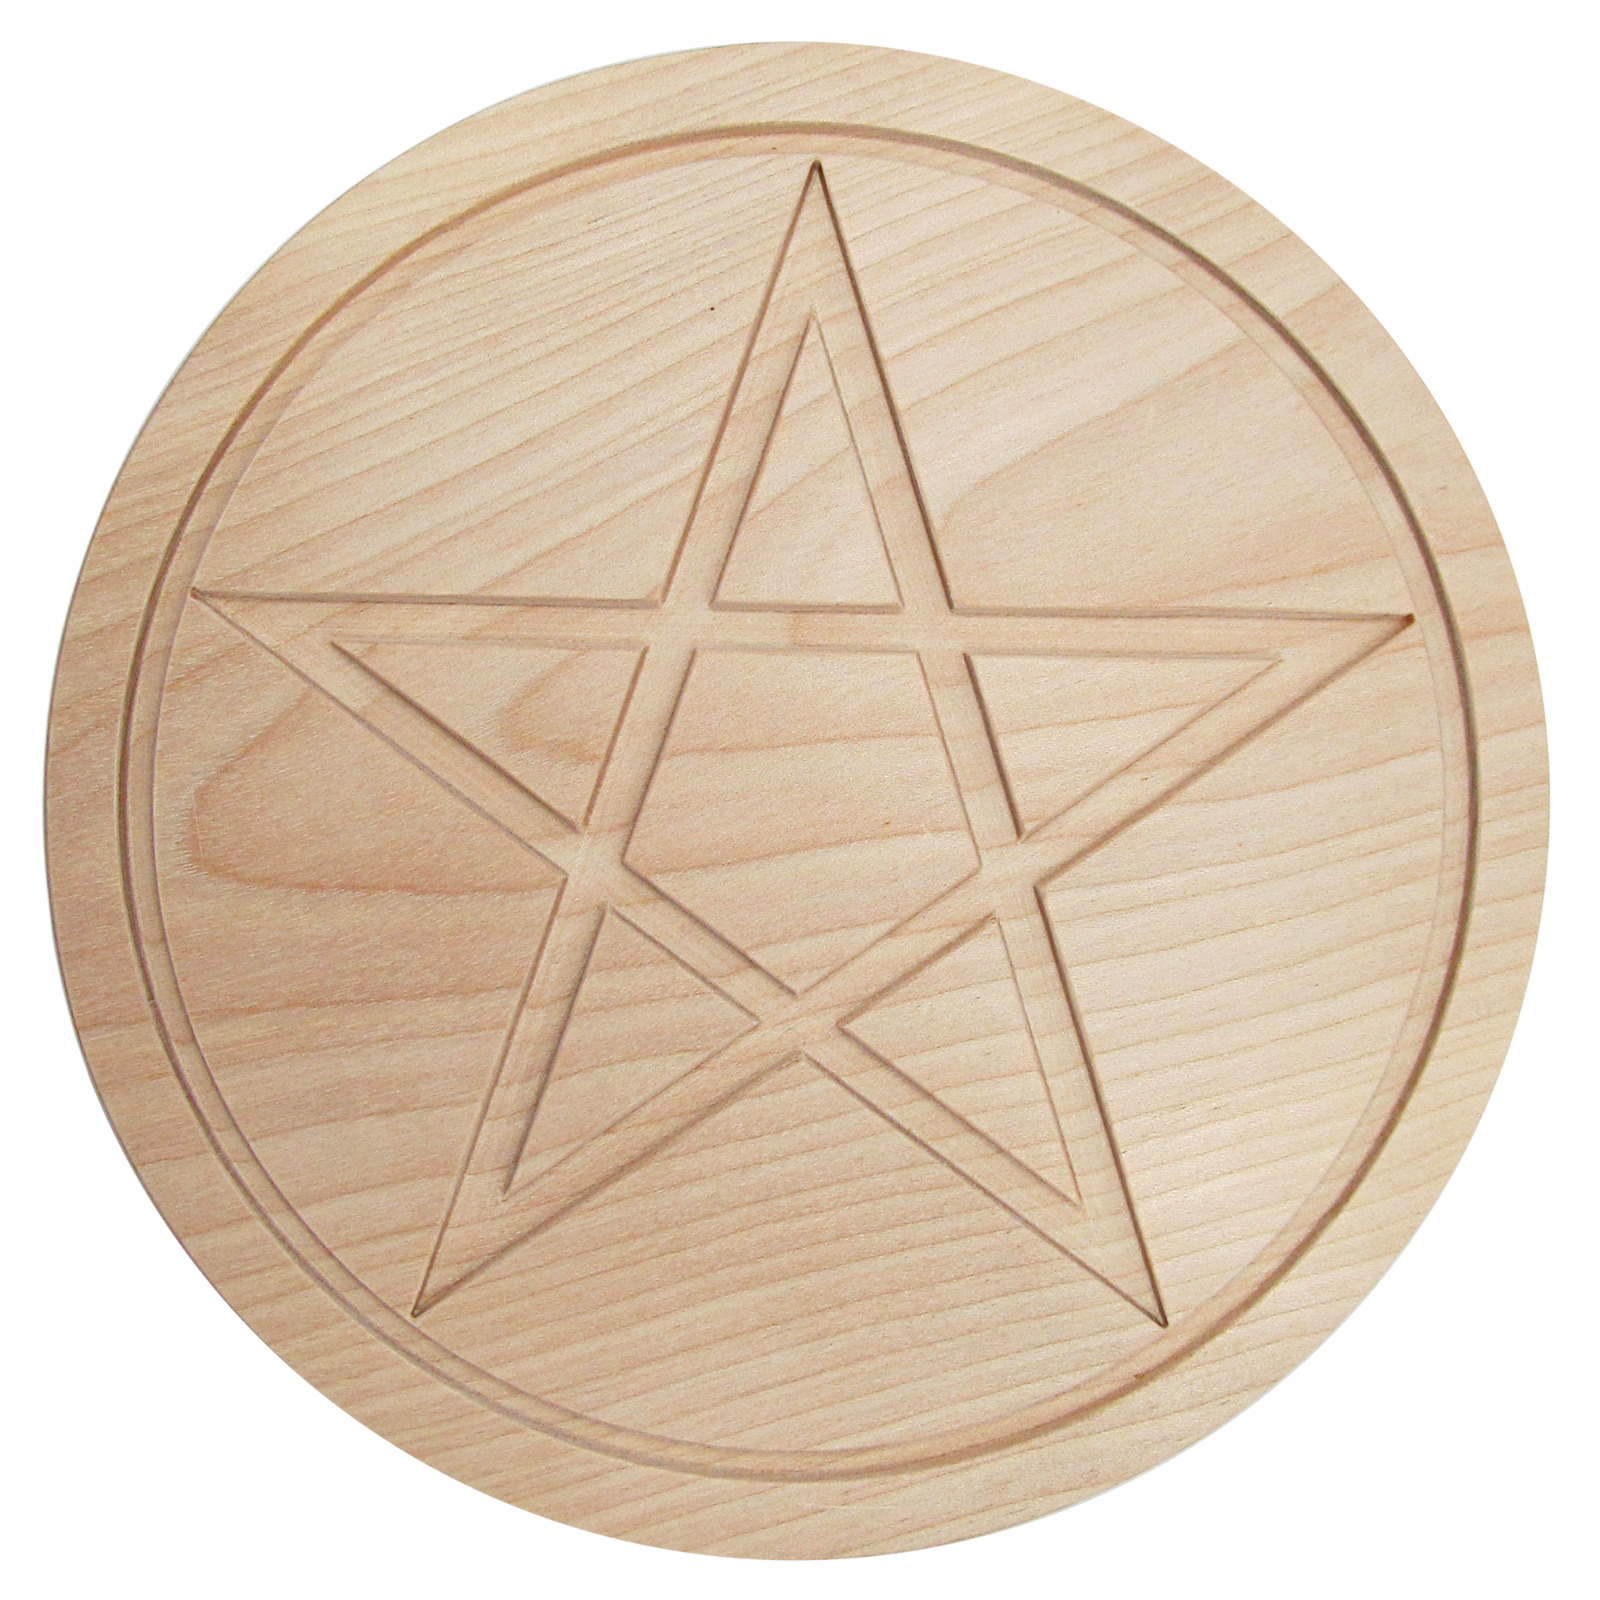 Birch Wood Pentacle Paten Plate Wicca Witchcraft Altar Ritual Tool - Unfinished